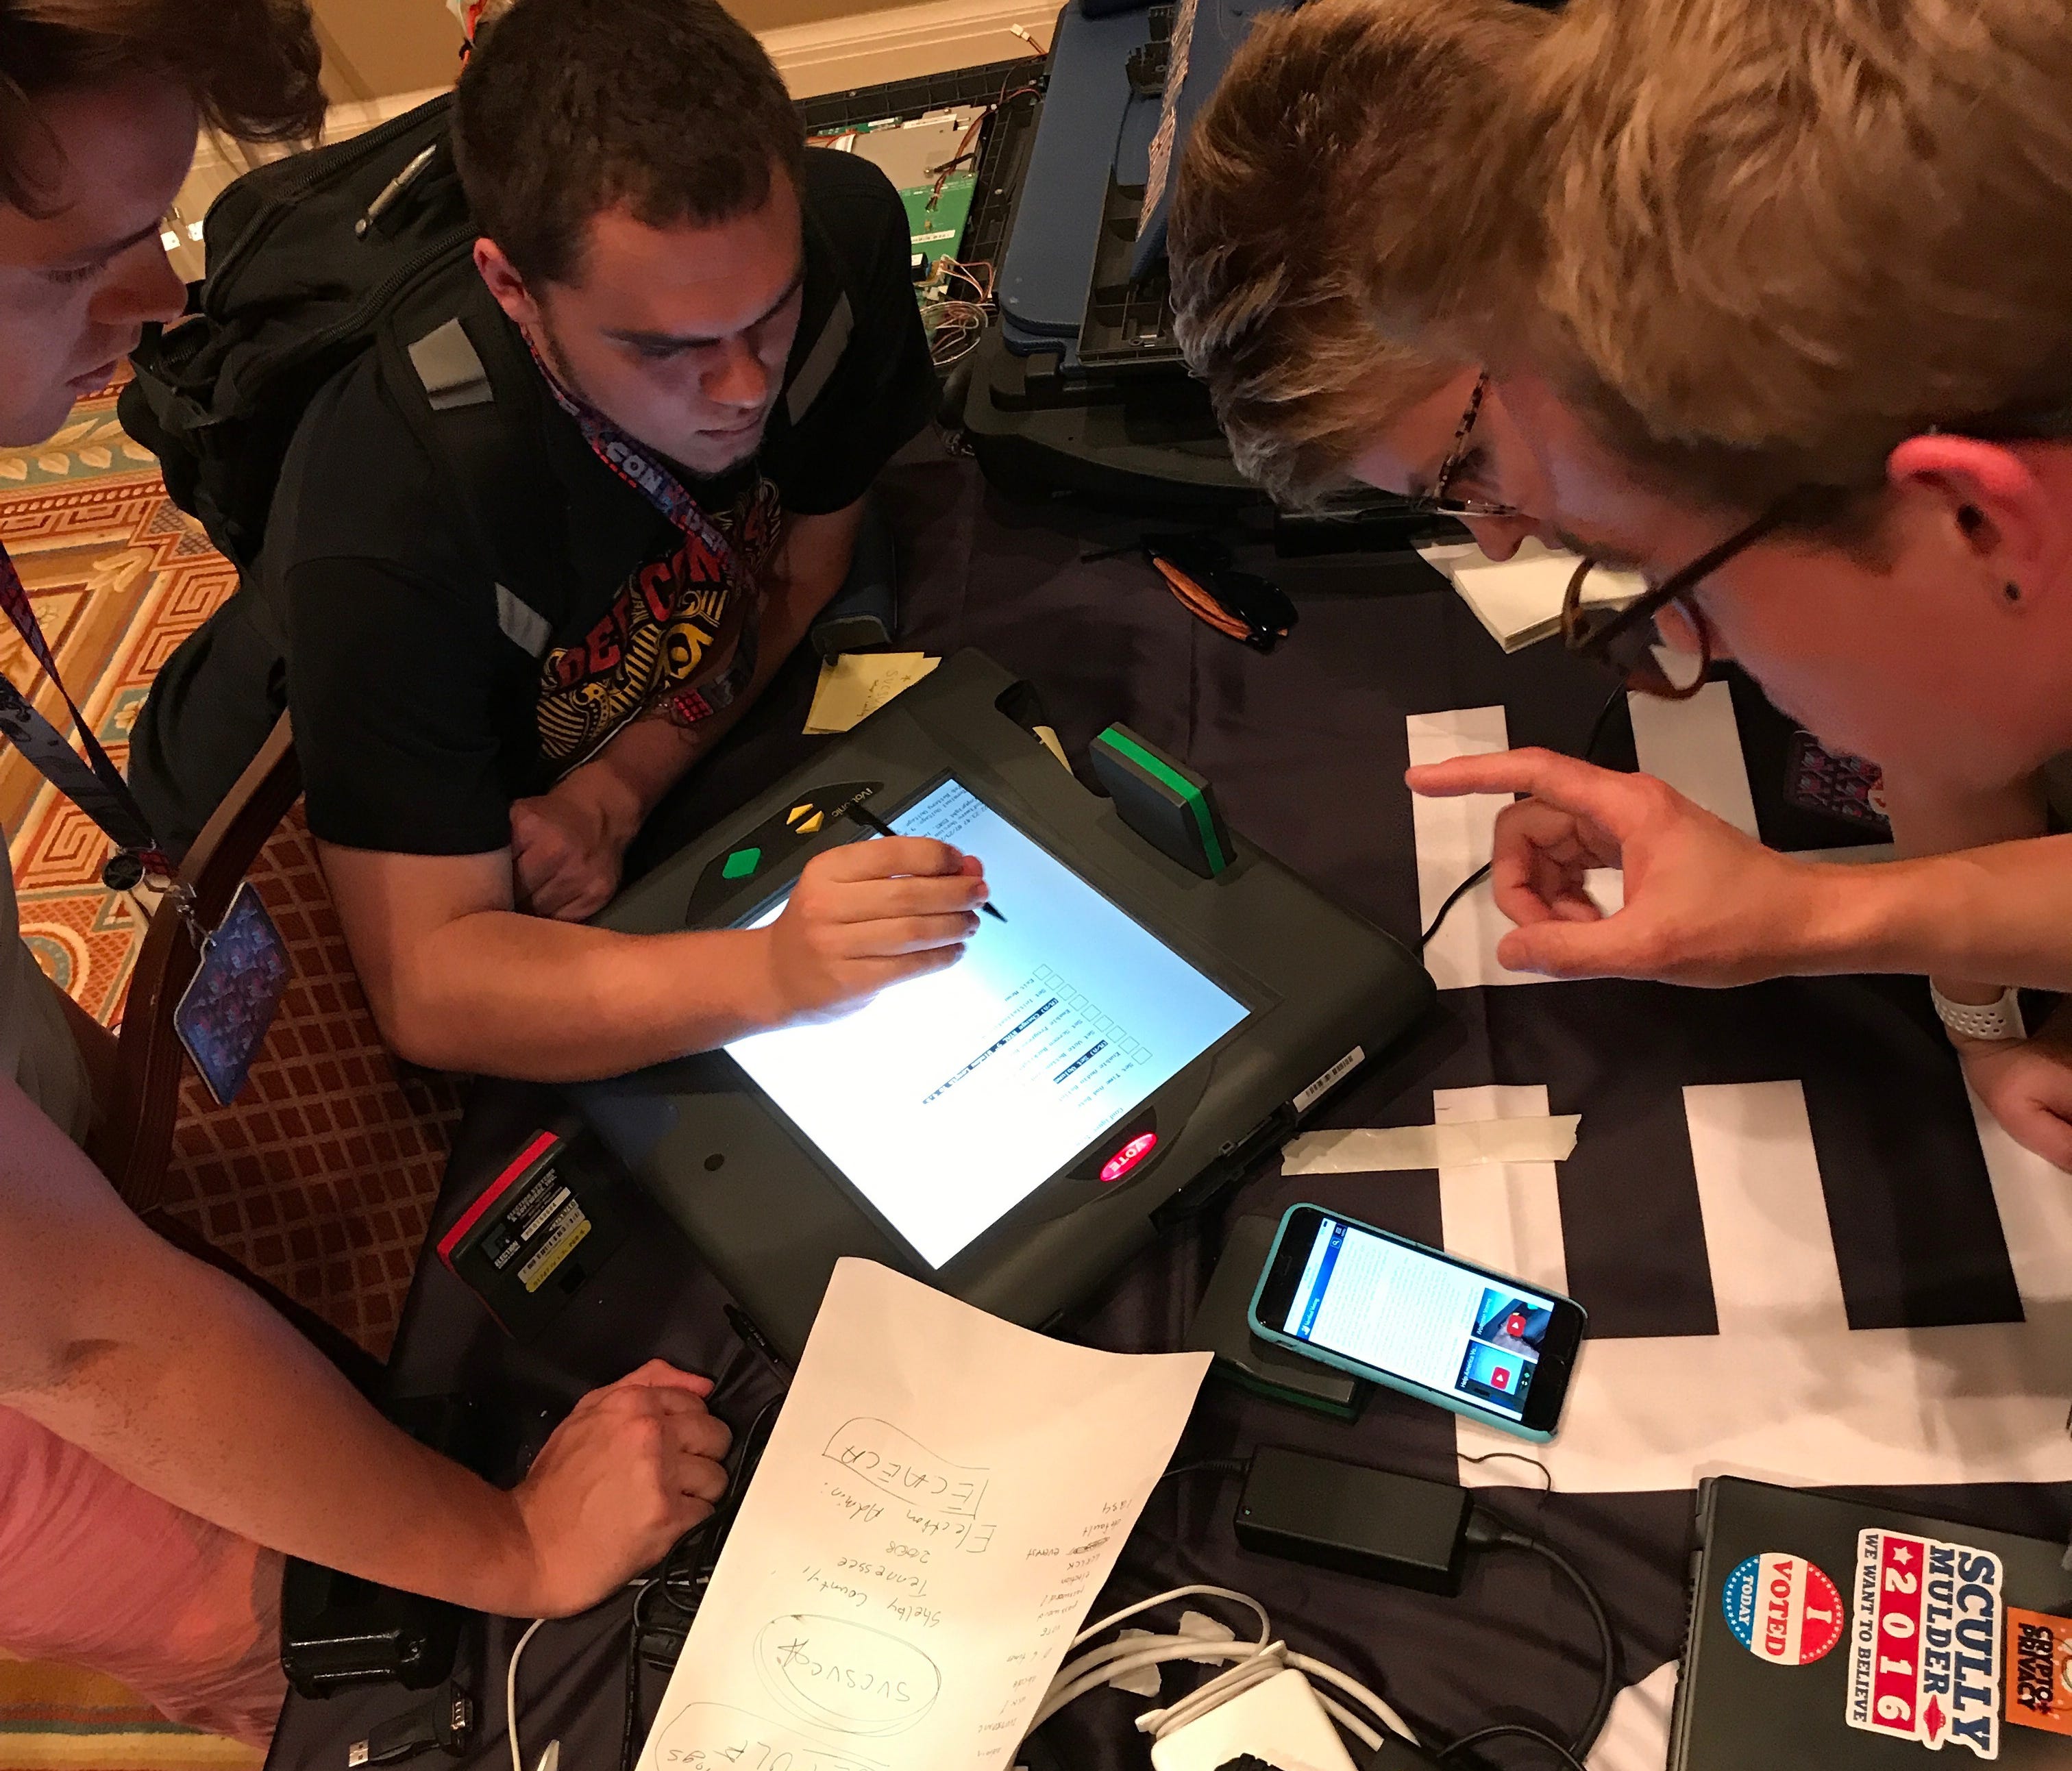 A group of hackers at the DefCon computer security conference in Las Vegas attempt to (legally) break in to a touch screen voting machine. The effort was part of a weekend-long  Voting Machine Hacking Village at the conference aimed at raising awaren